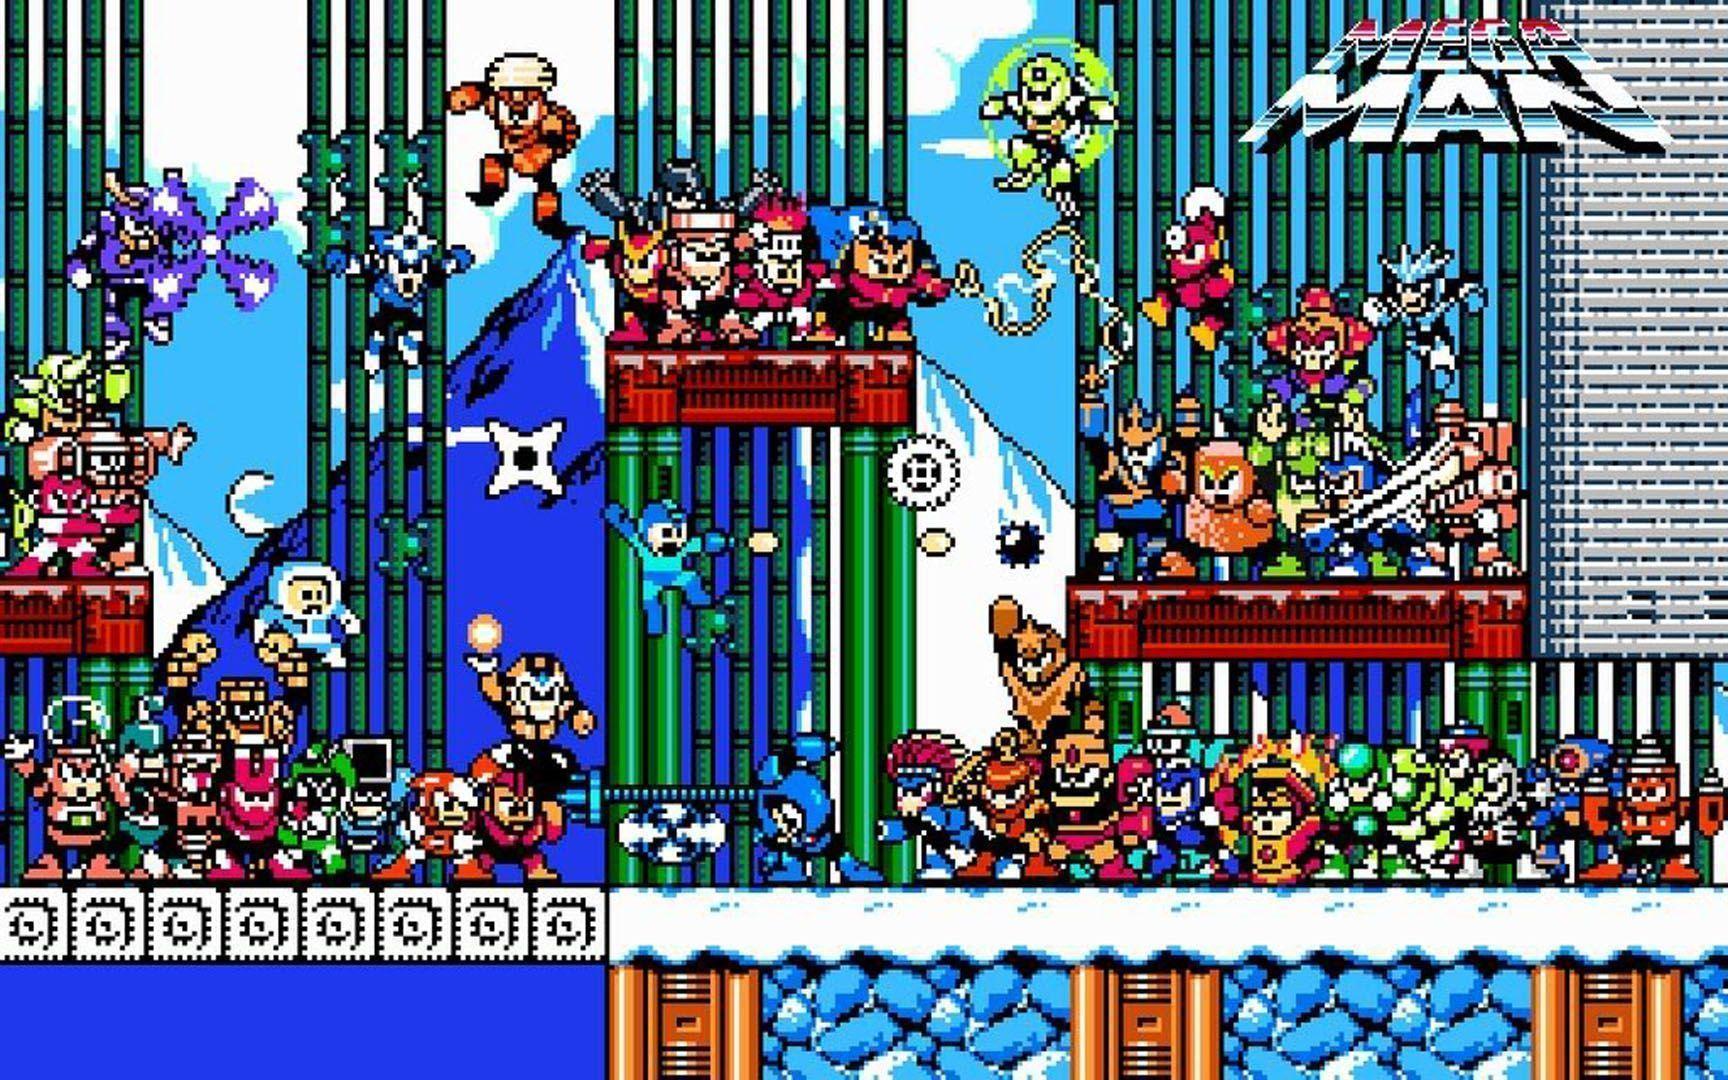 Pixellated People Games Wallpaper Image featuring Megaman